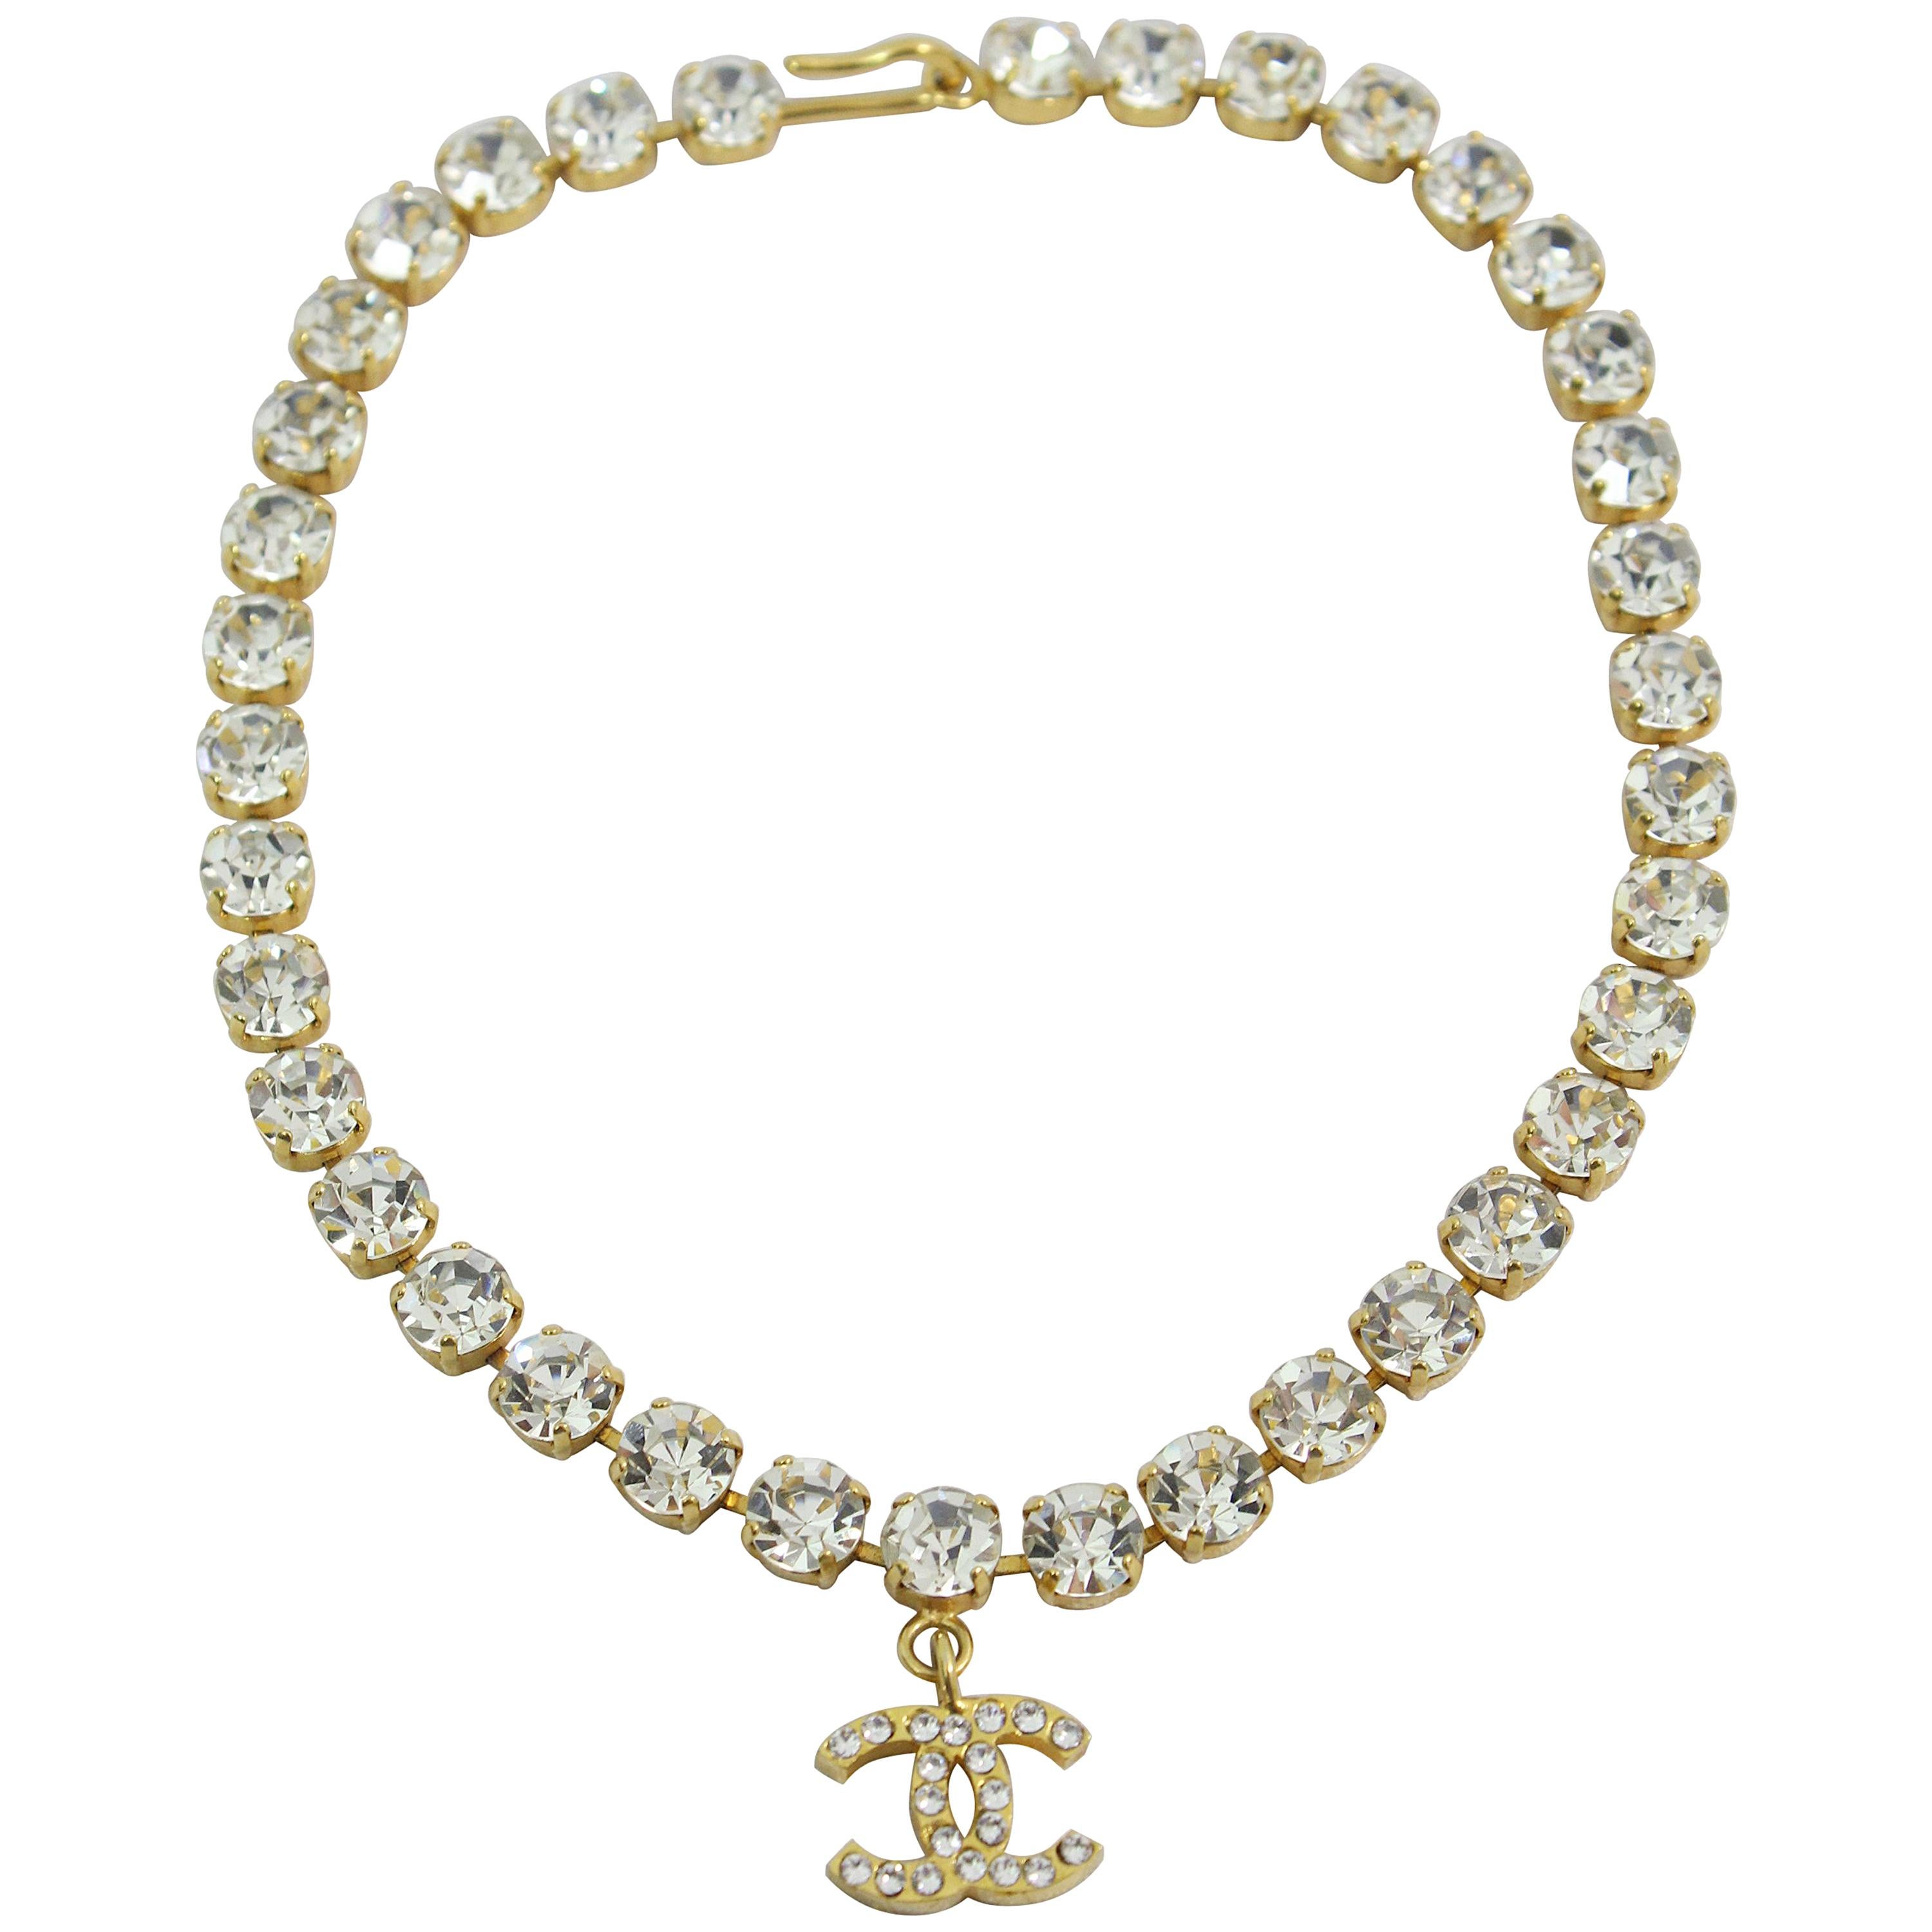 1996 Chanel Vintage Golden Metal Necklace and Fake Diamonds